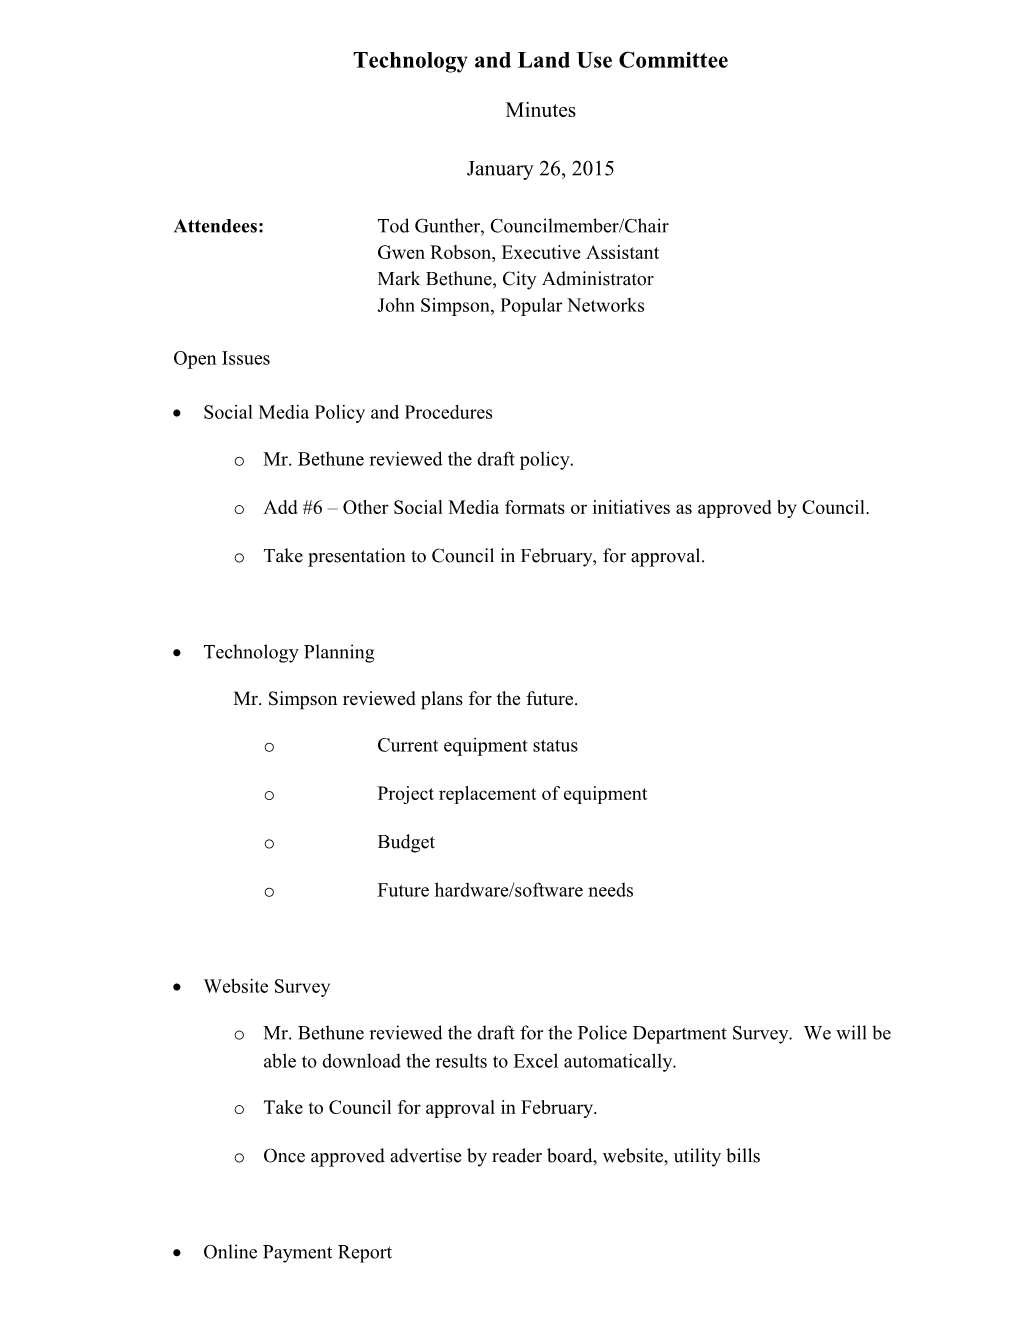 Minutes for Organization Meeting (Long Form) s1